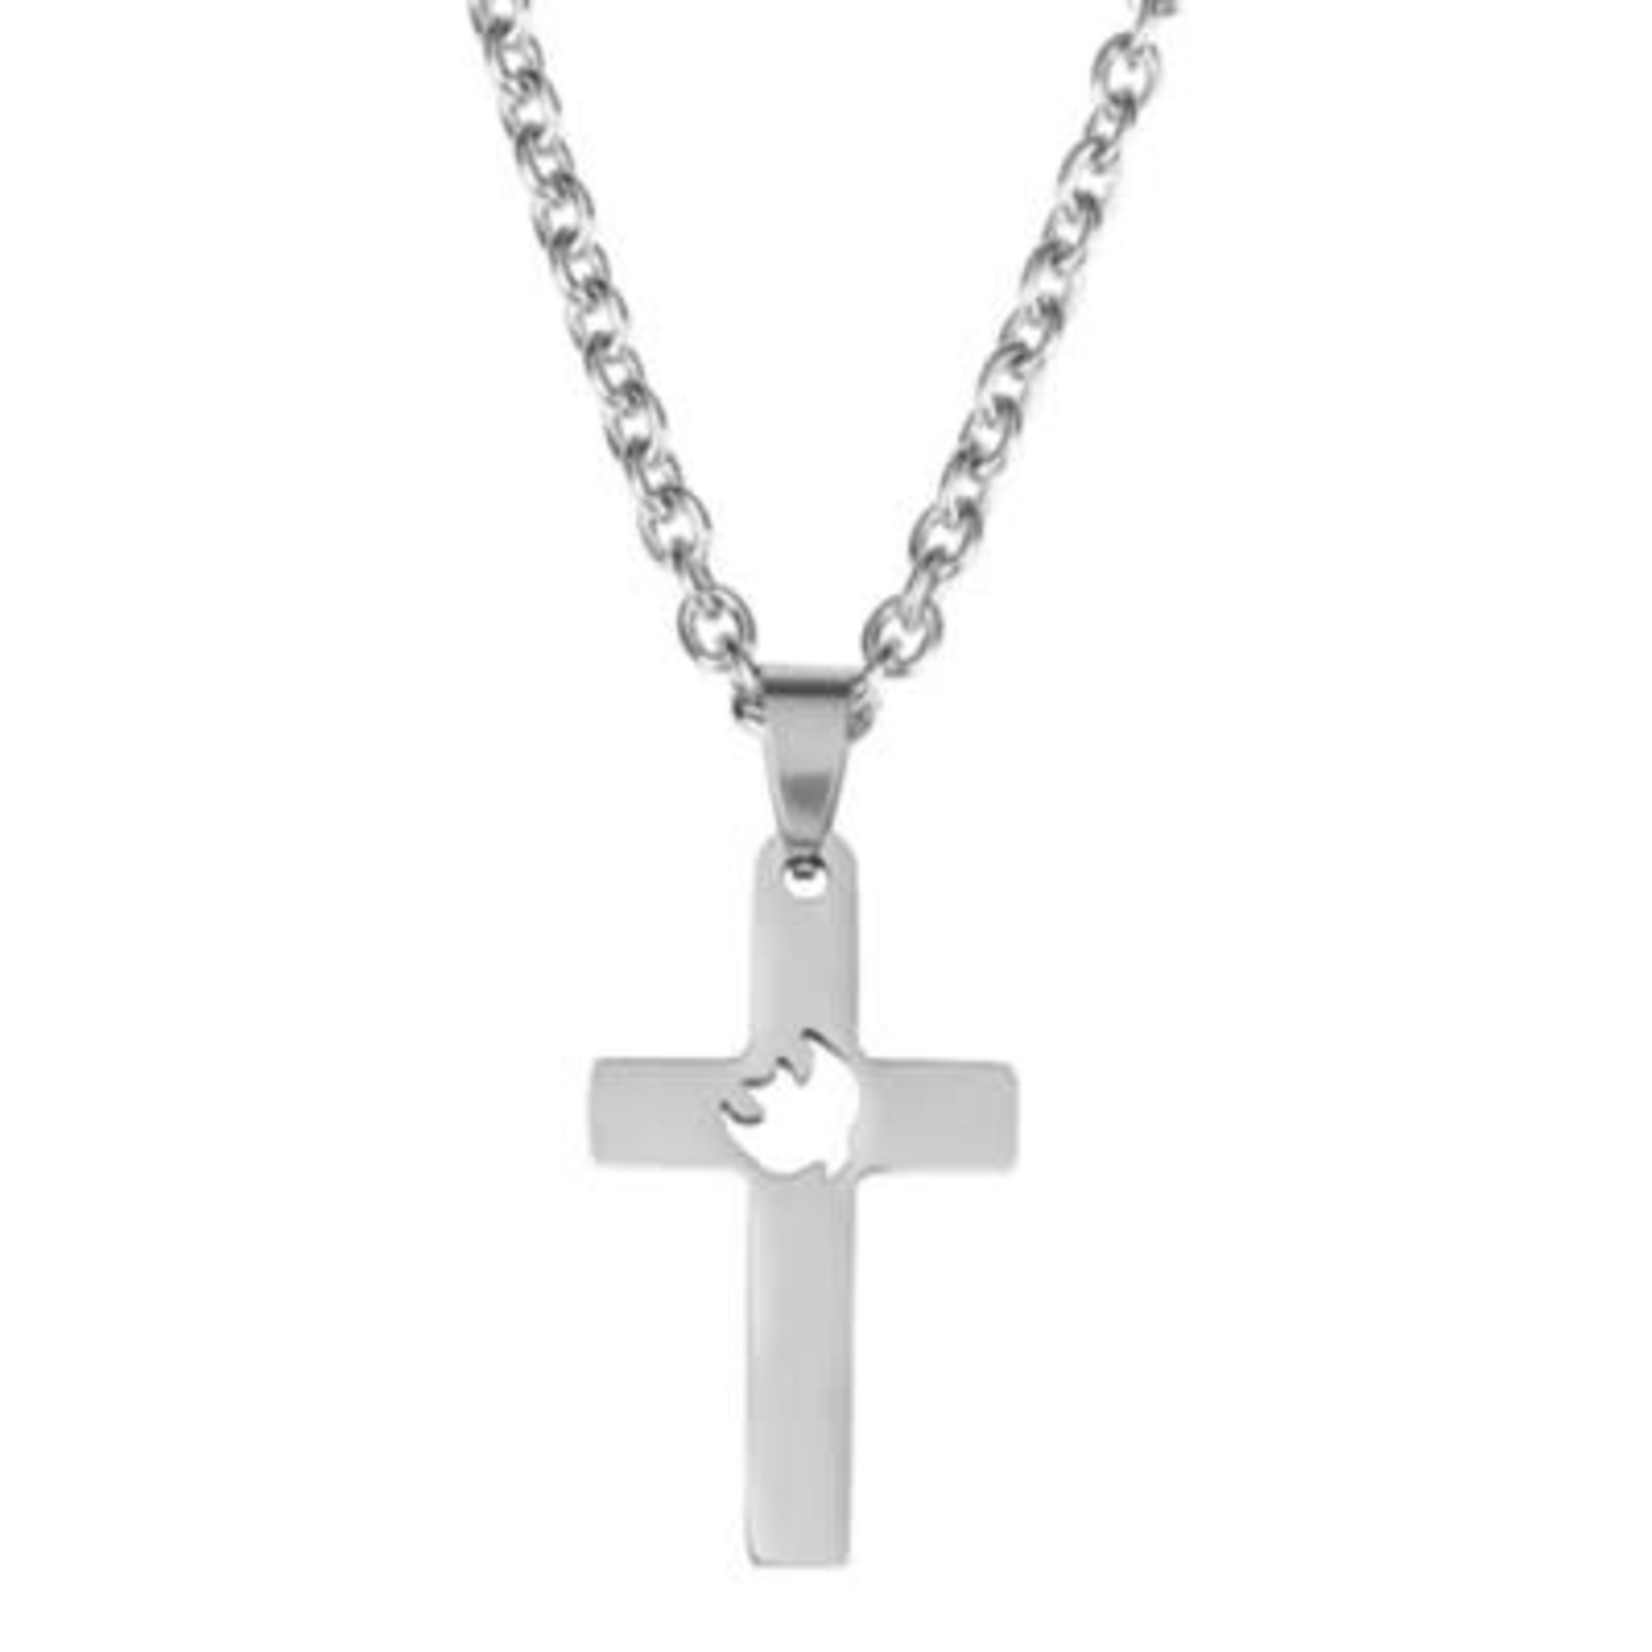 Men's Stainless Steel Dove Cutout Cross Necklace